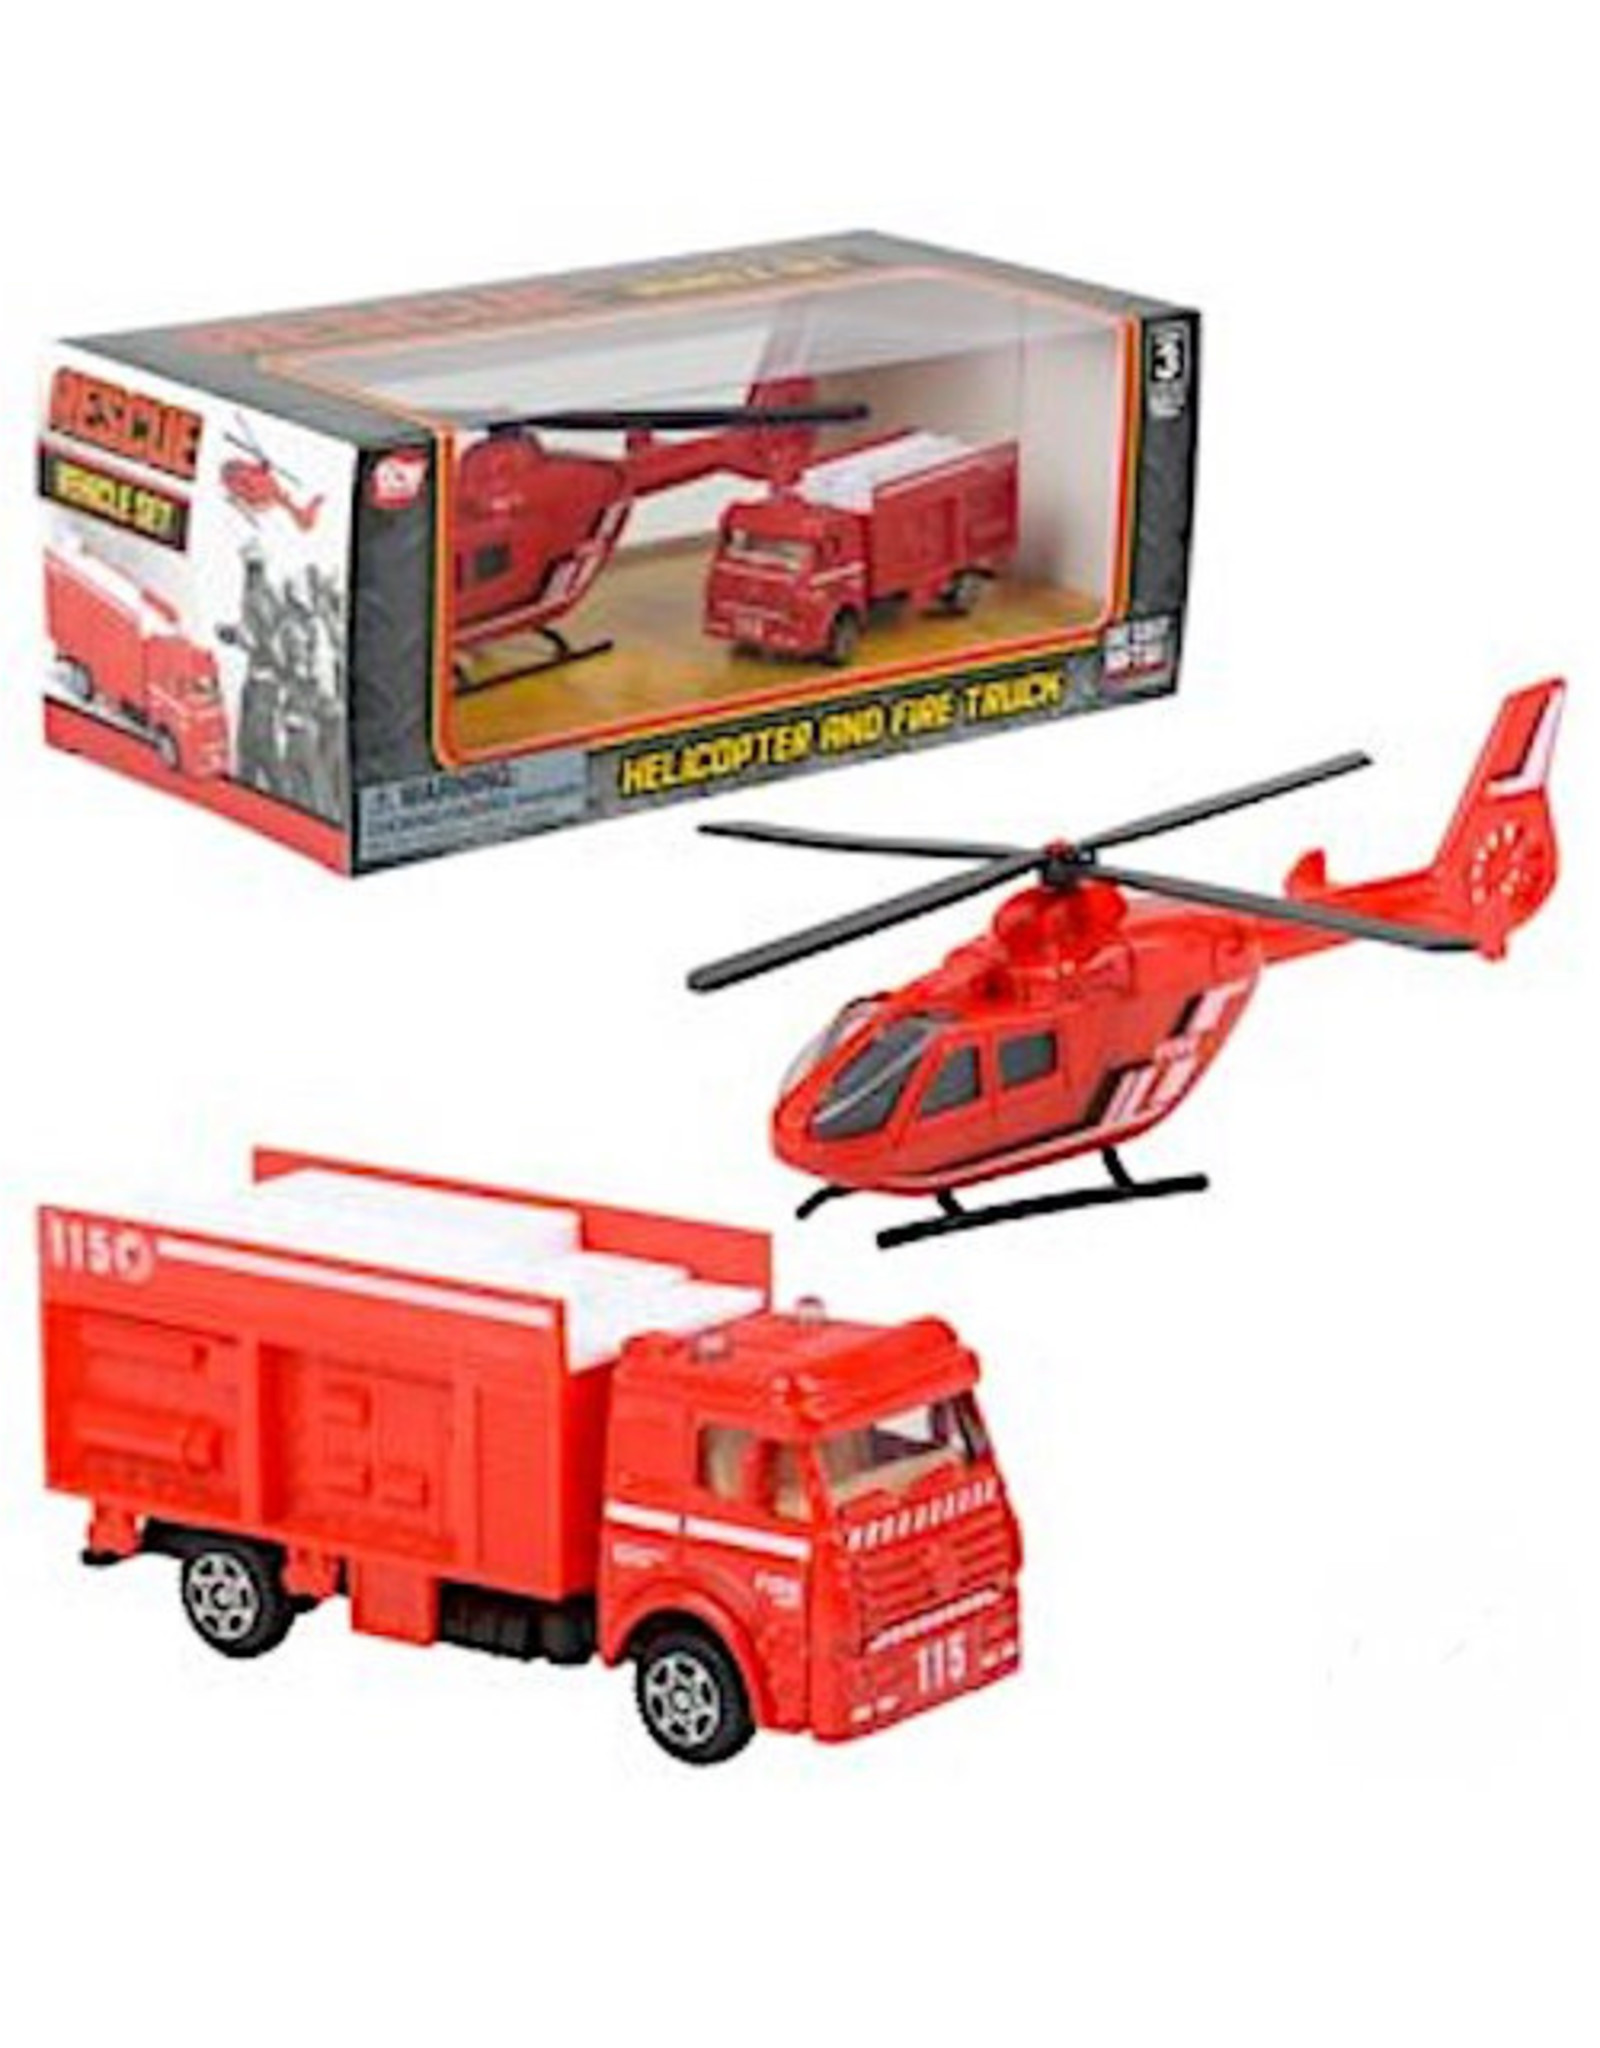 The Toy Network DIECAST FIREFIGHTER SET